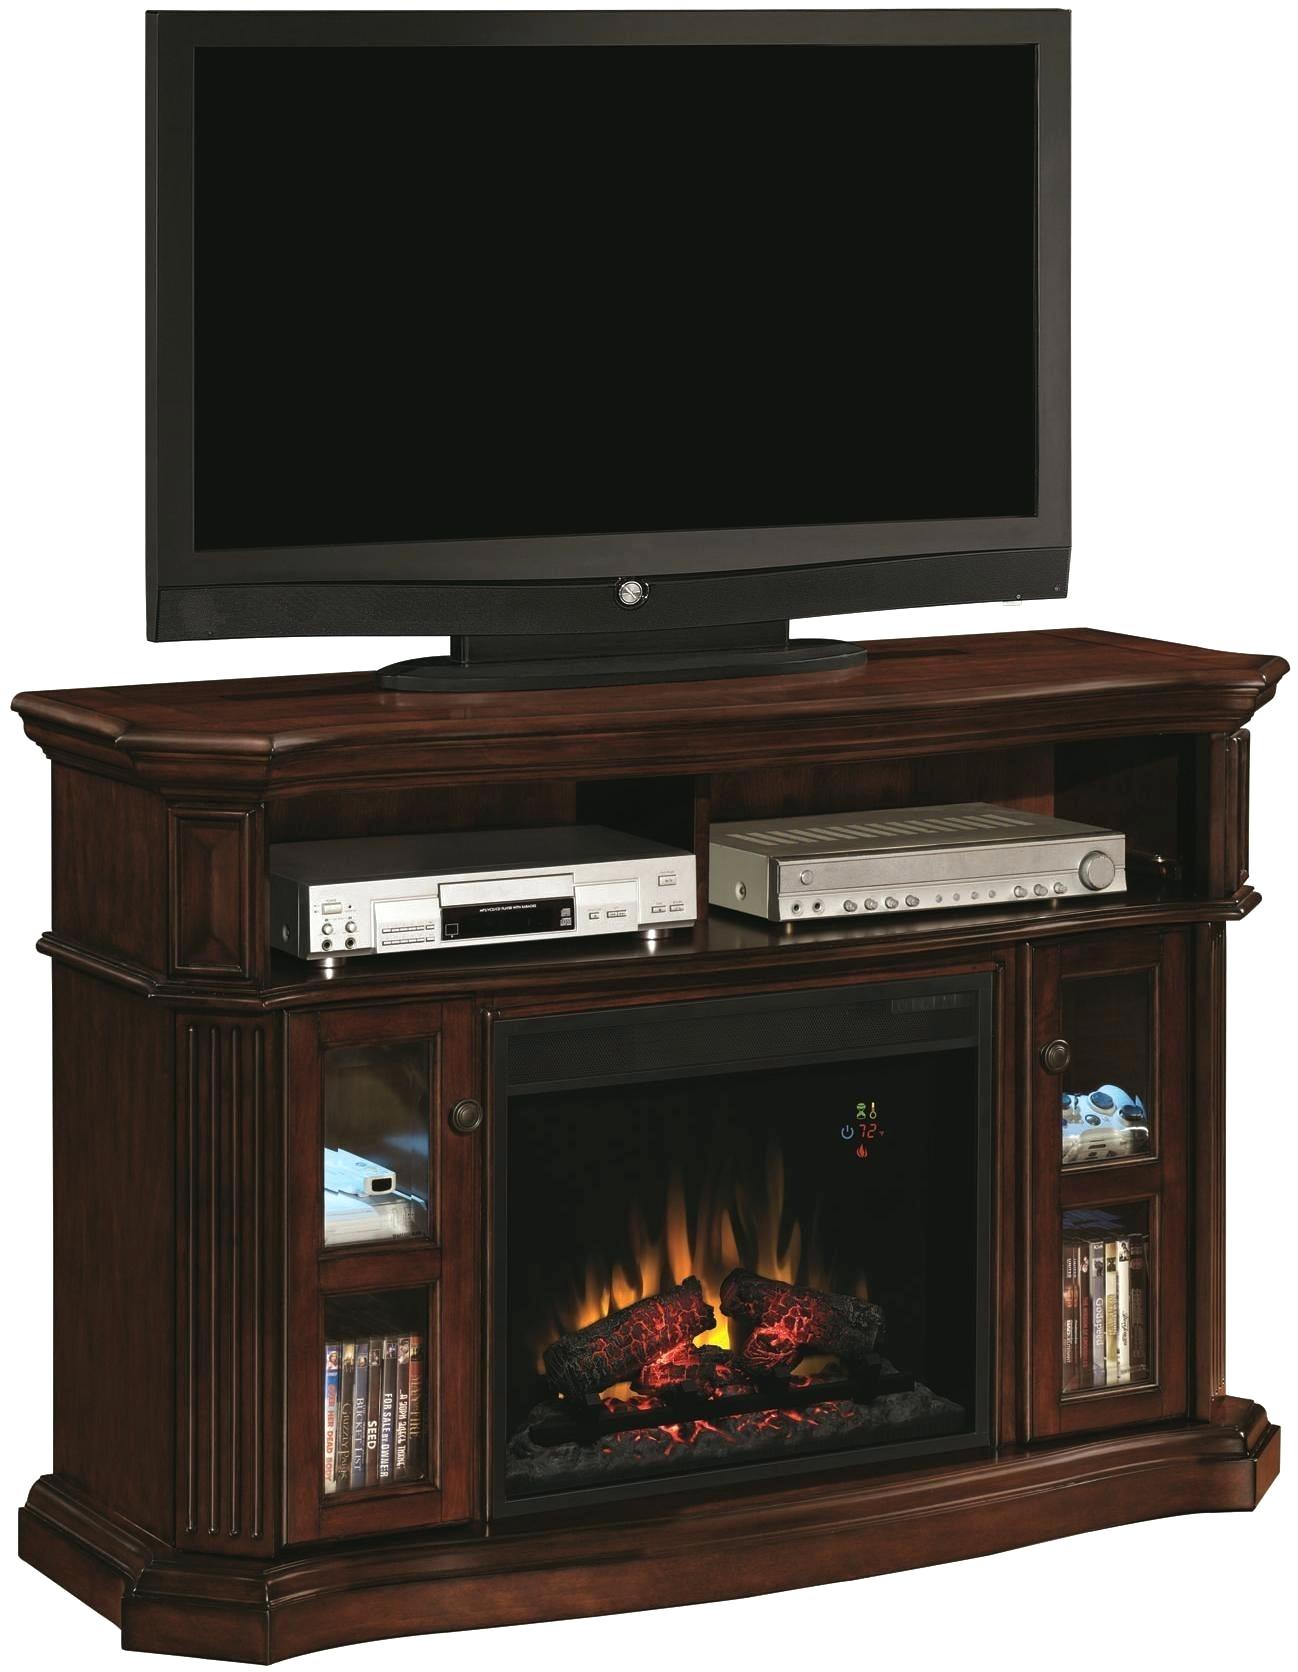 media cabinet with fireplace electric fireplace media cabinet with two glass front doors open ponent media cabinet next to fireplace tv media cabinet with fireplace